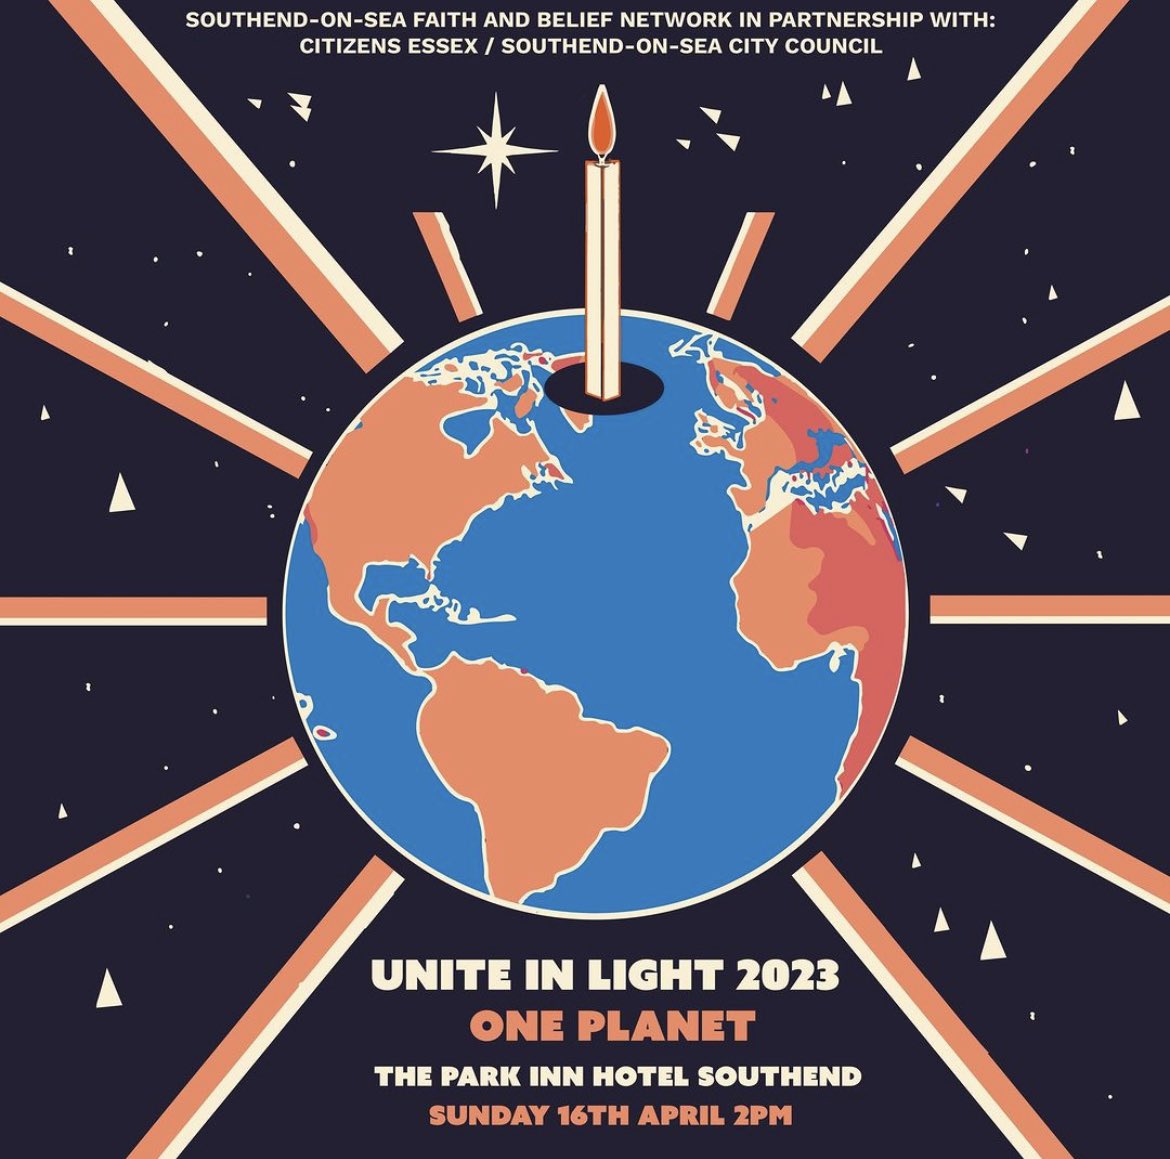 Unite in Light: One Planet, a multi faith celebration taking place on Sunday 16th April at 2pm. Brought to you by Southend-on-Sea Belief & Faith Network in partnership with Citizens Essex and the City Council. Free tickets: actionnetwork.org/events/unite-i…